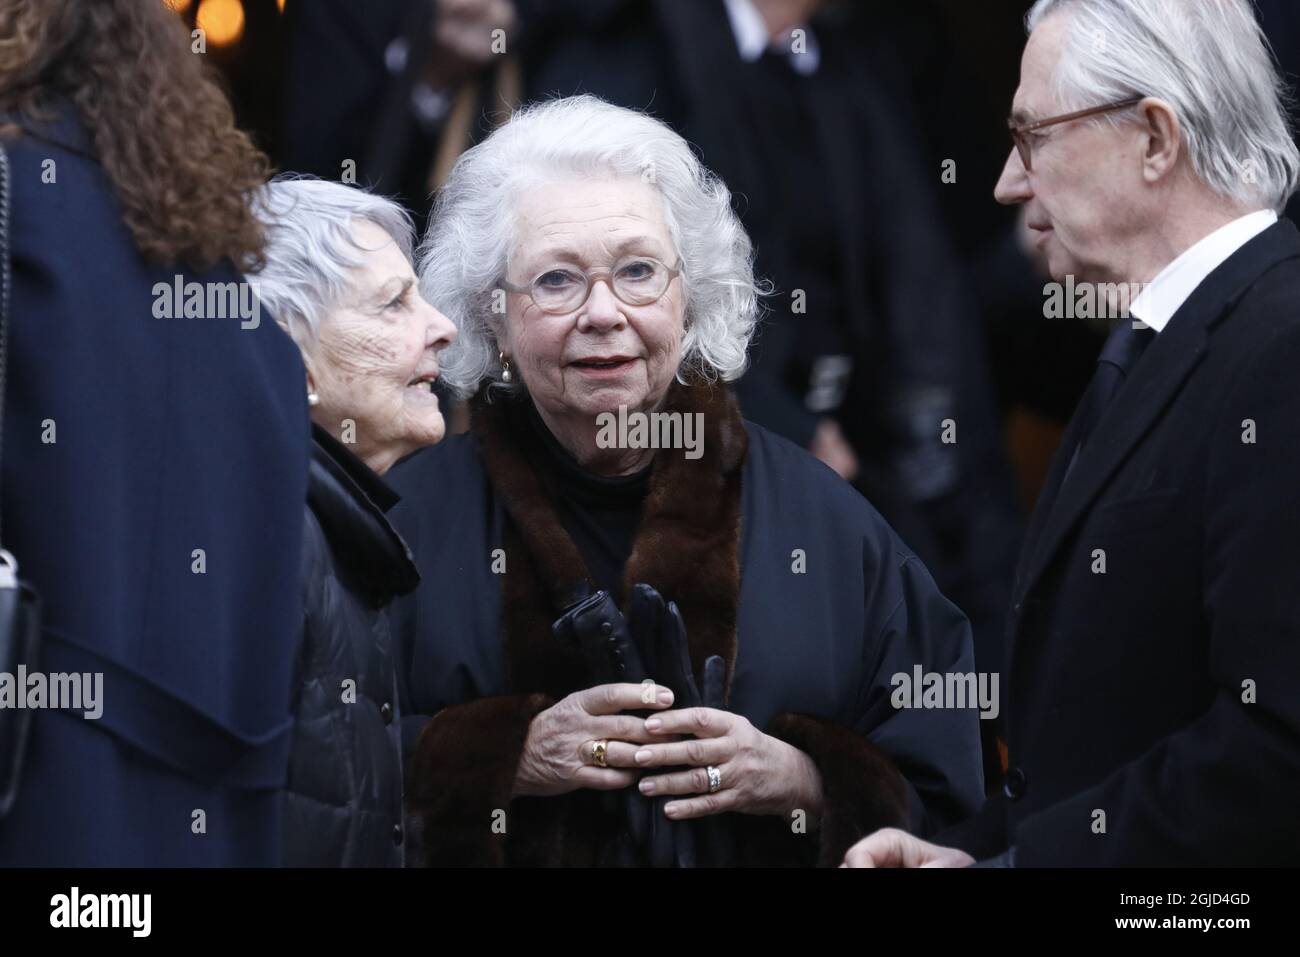 Prince Christina during the funeral of Dagmar von Arbin in the Oscars Church in central Stockholm, Sweden on Tuesday, February 4, 2020 Photo Patrik Osterberg / TT Kod 2857 Stock Photo